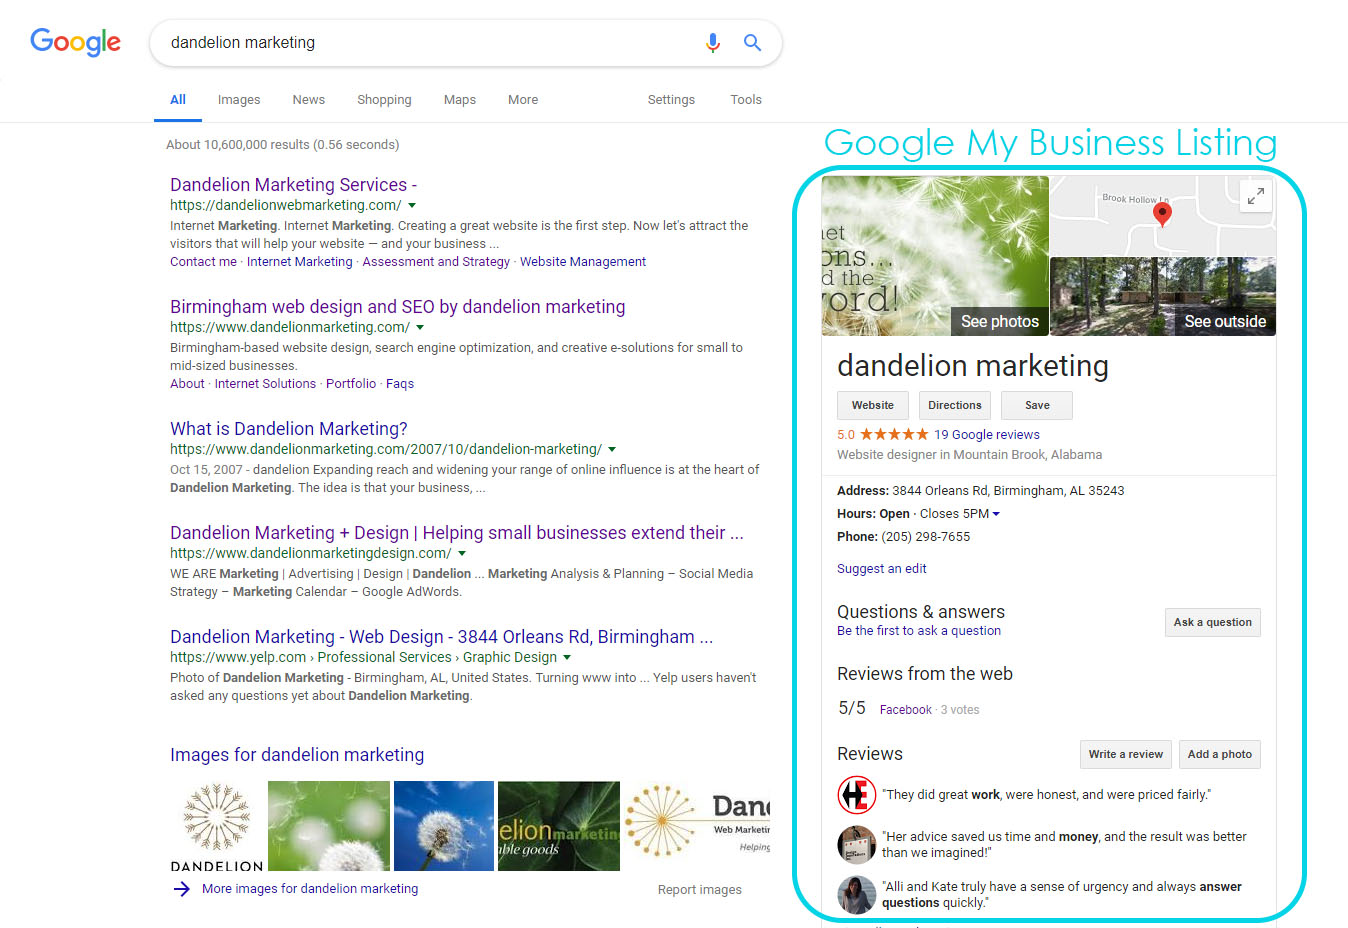 Example of a Google My Business Listing